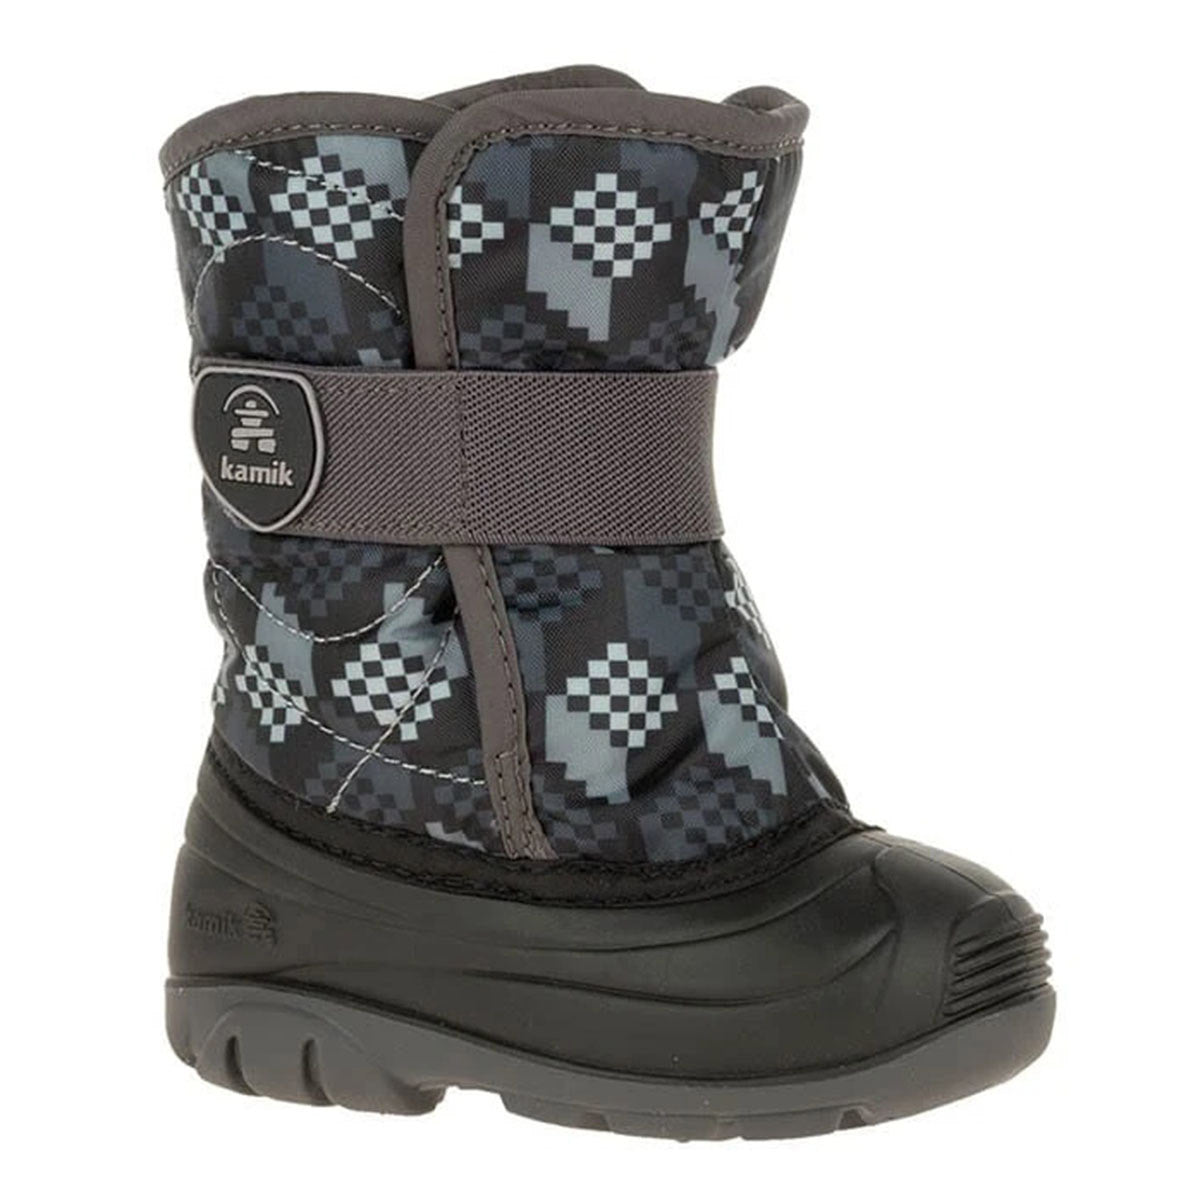 A toddler&#39;s Kamik KAMIK SNOWBUG 4 BLACK/CHARCOAL winter boot with a pixelated camouflage pattern and a black rubber sole.